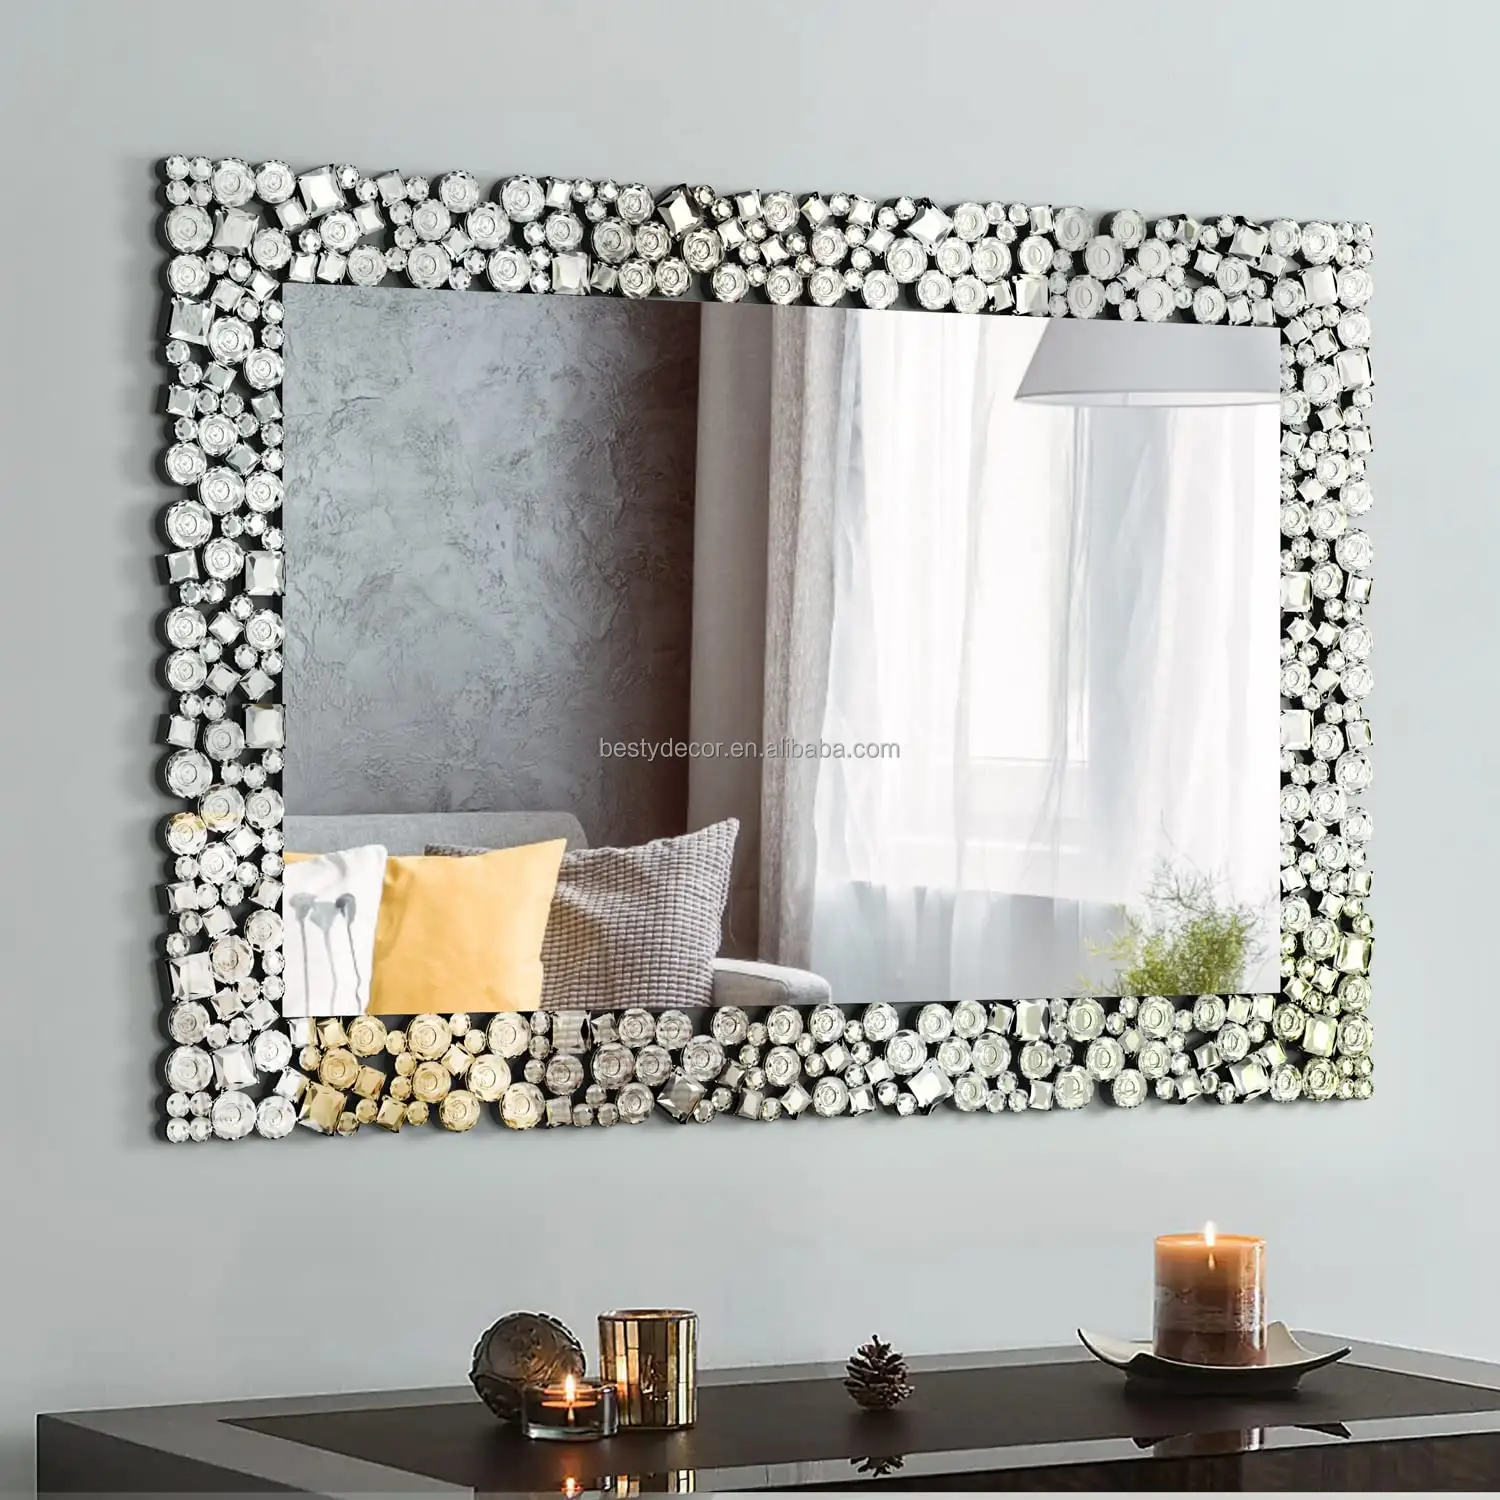 Rectangular Wall Mirror 27.5*39.3 Inches Large Decorative Wall Mirrors Mosaic Frame Design Crystal Accent Decor Mirrors